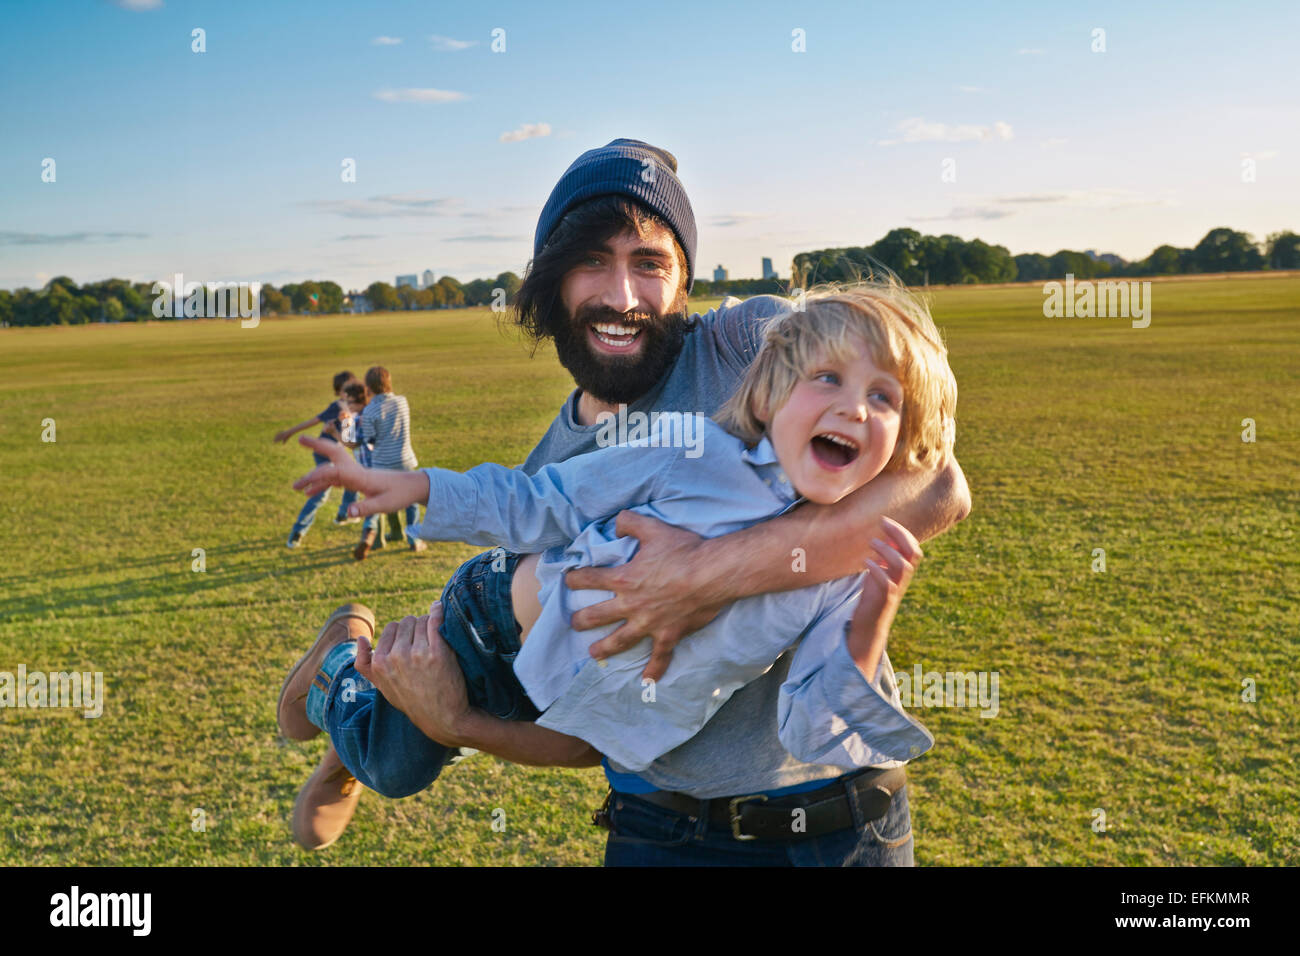 Mid adult man carrying son in field Banque D'Images